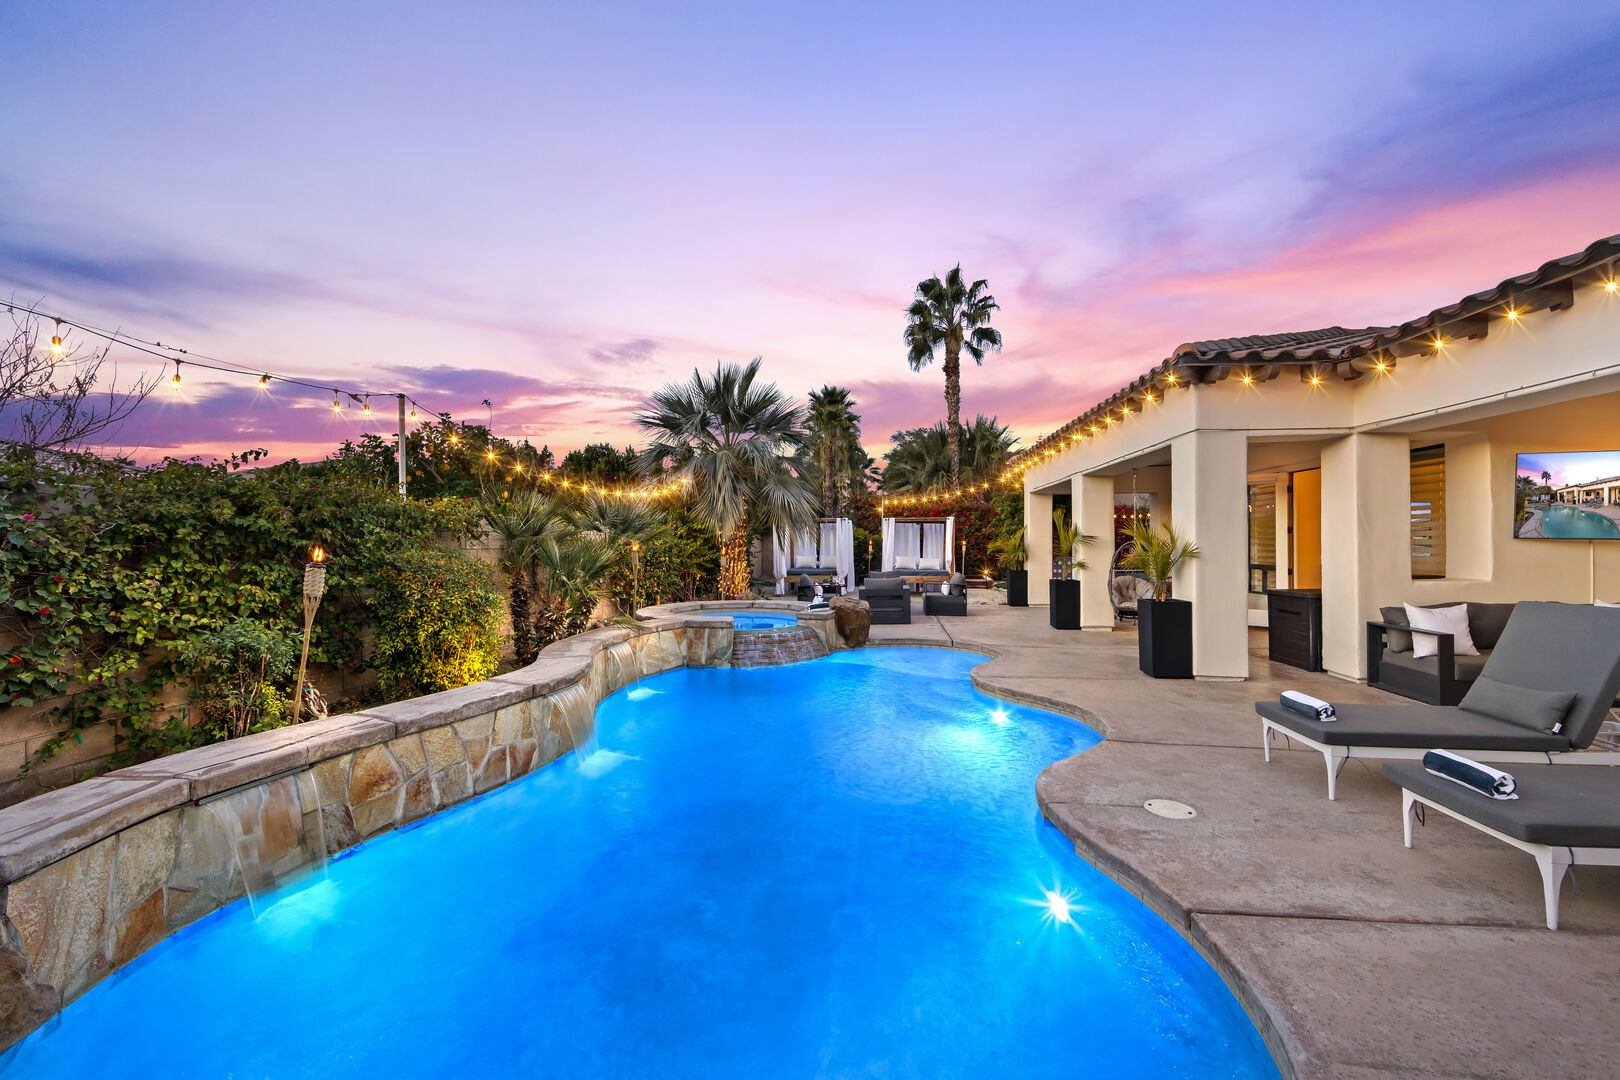 Santana will exceed your expectations when it comes to outdoor entertaining. With a pool, spa, games, and more!